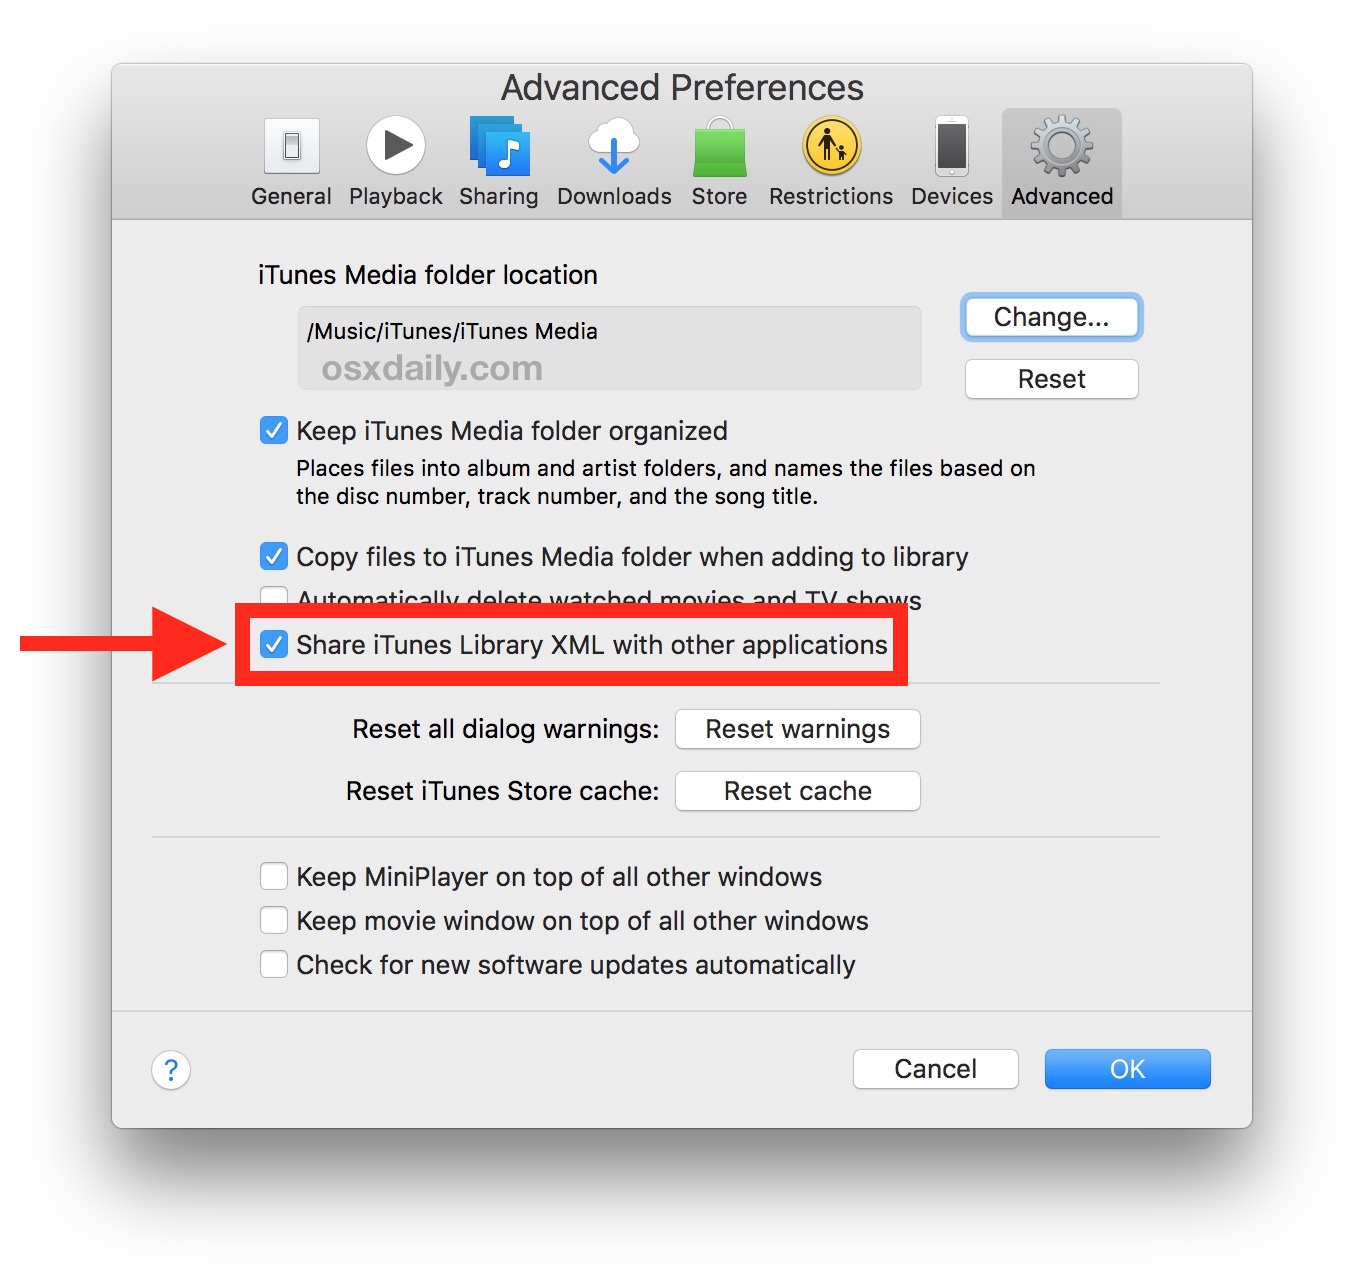 Delete iTunes preferences file: Locate the iTunes preferences file (iTunesPrefs.xml) and delete it. This file will be regenerated when you launch iTunes.
Reinstall iTunes: If all else fails, try uninstalling and reinstalling iTunes on your Windows 10 computer.